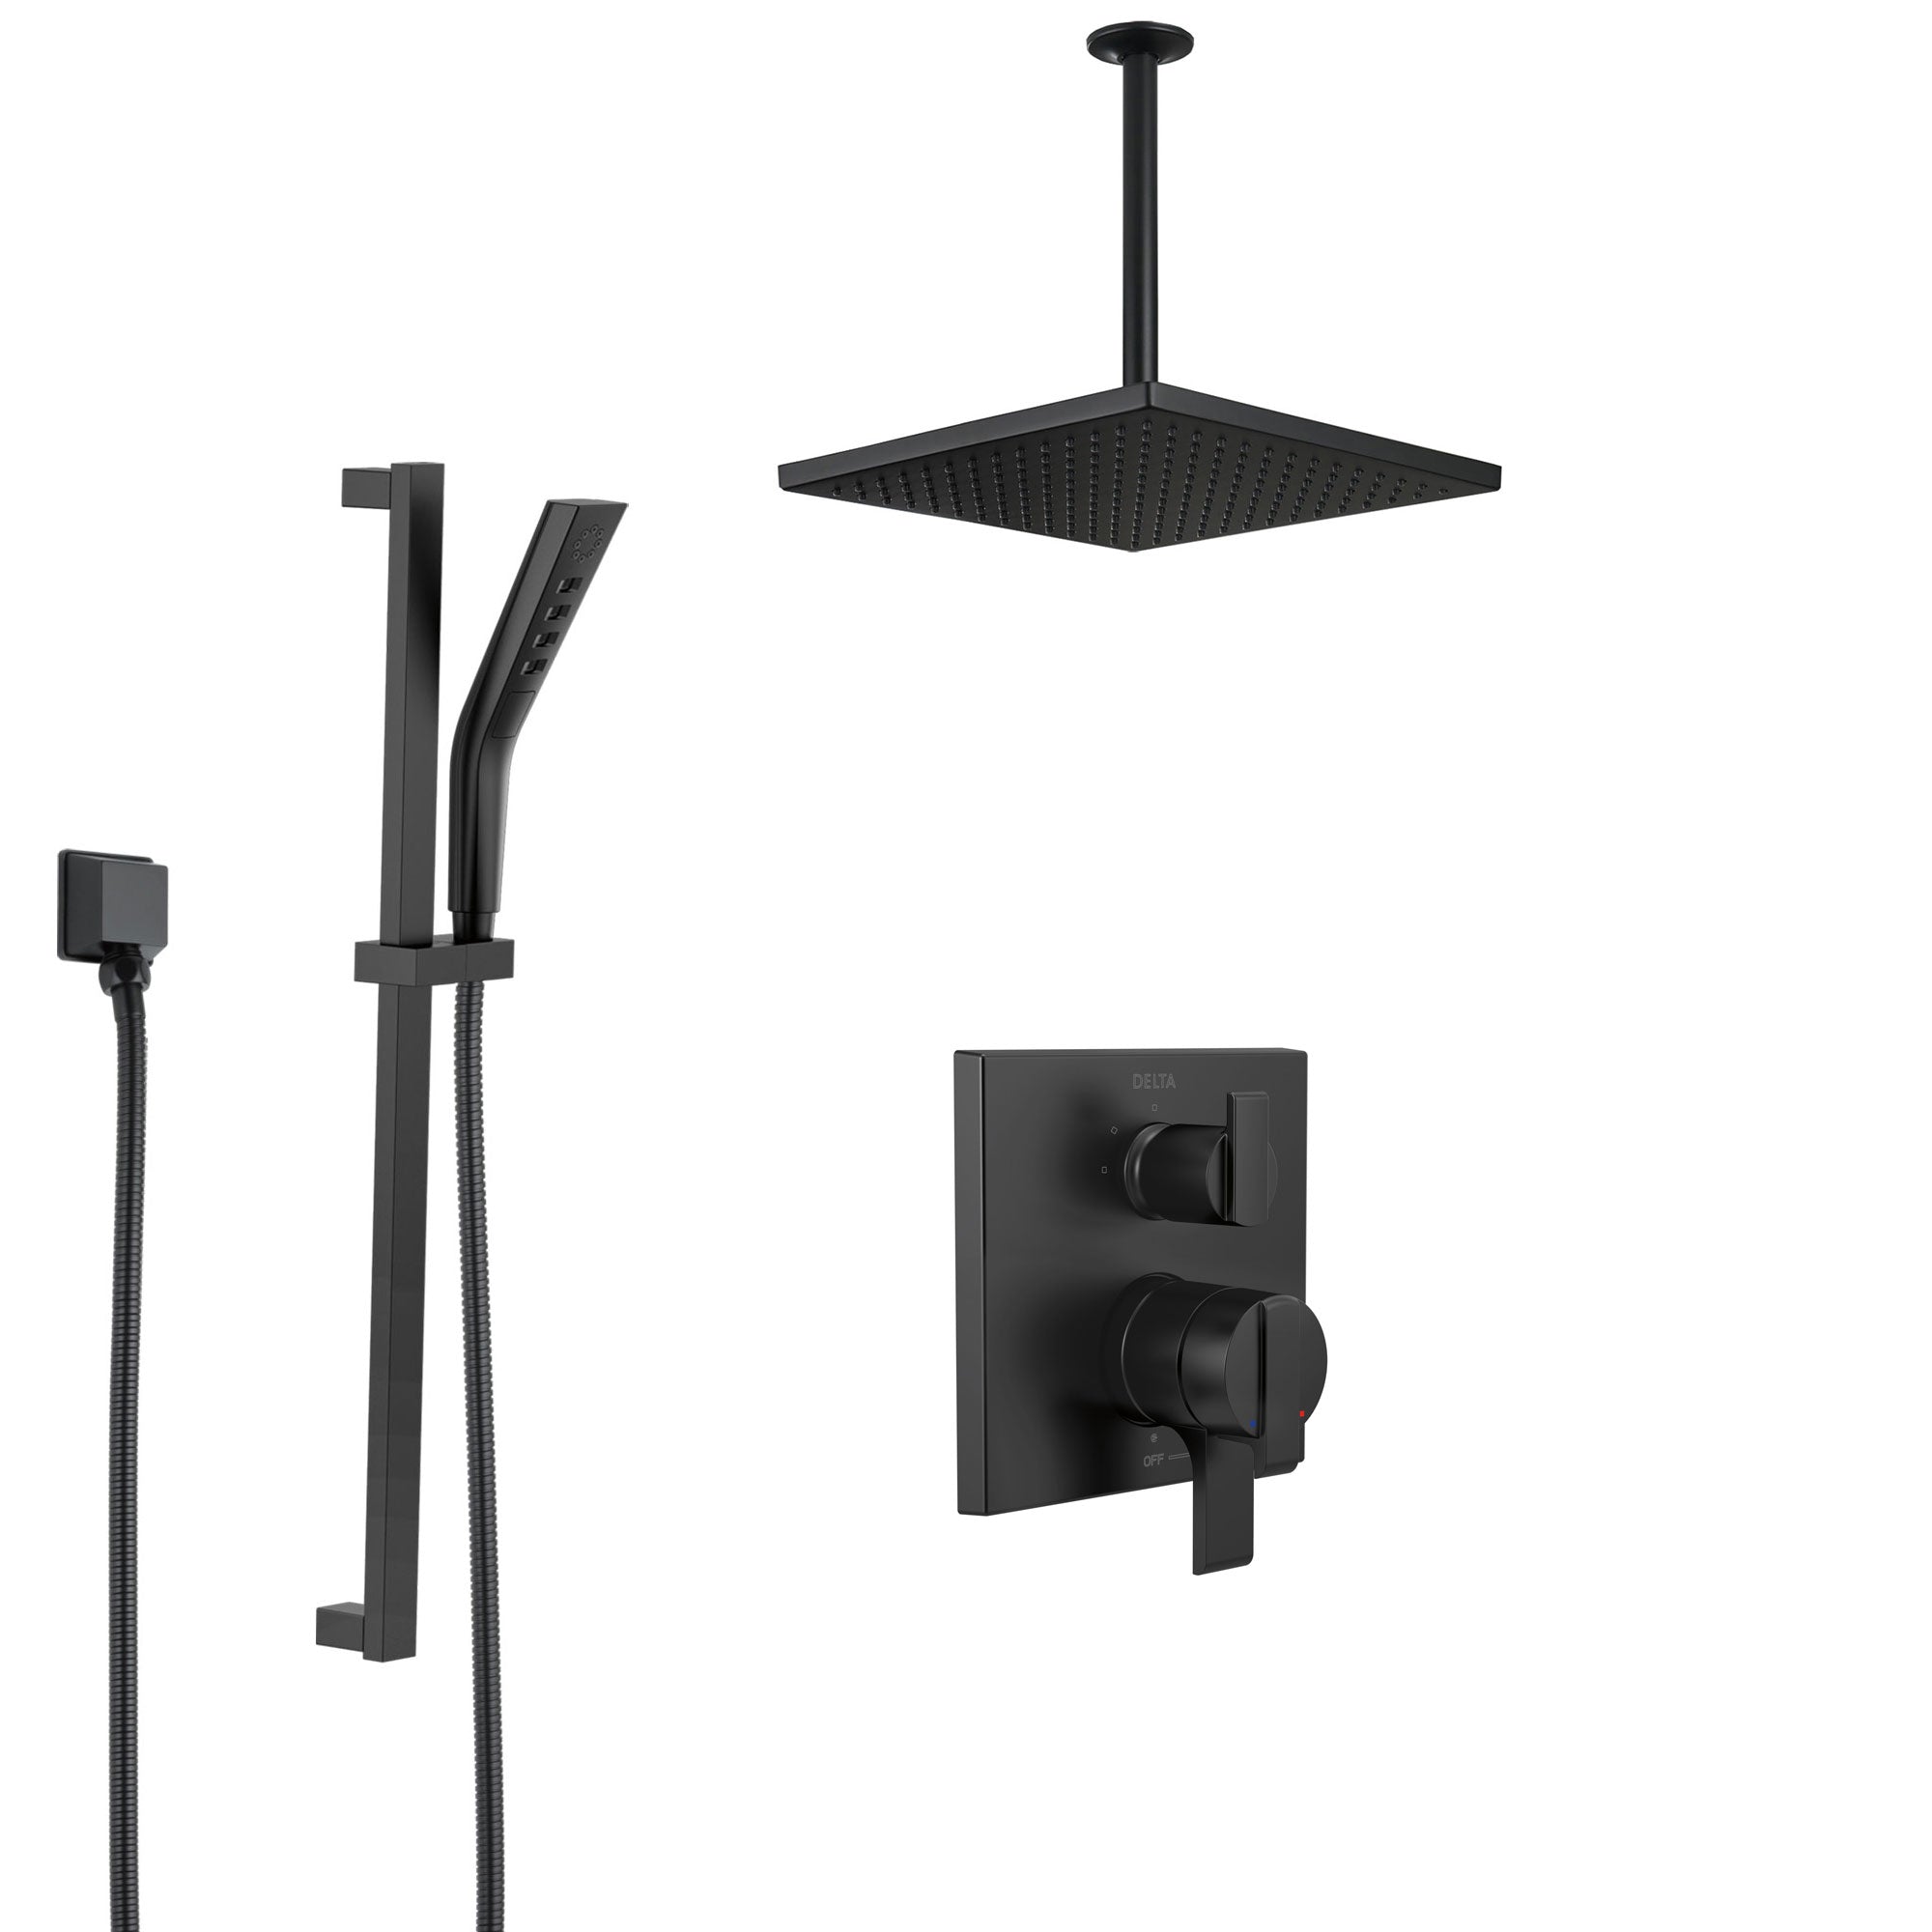 Delta Ara Matte Black Finish Shower System with Integrated Diverter Control, Hand Shower with Slide Bar, and Large Ceiling Mount Showerhead SS27867BL2